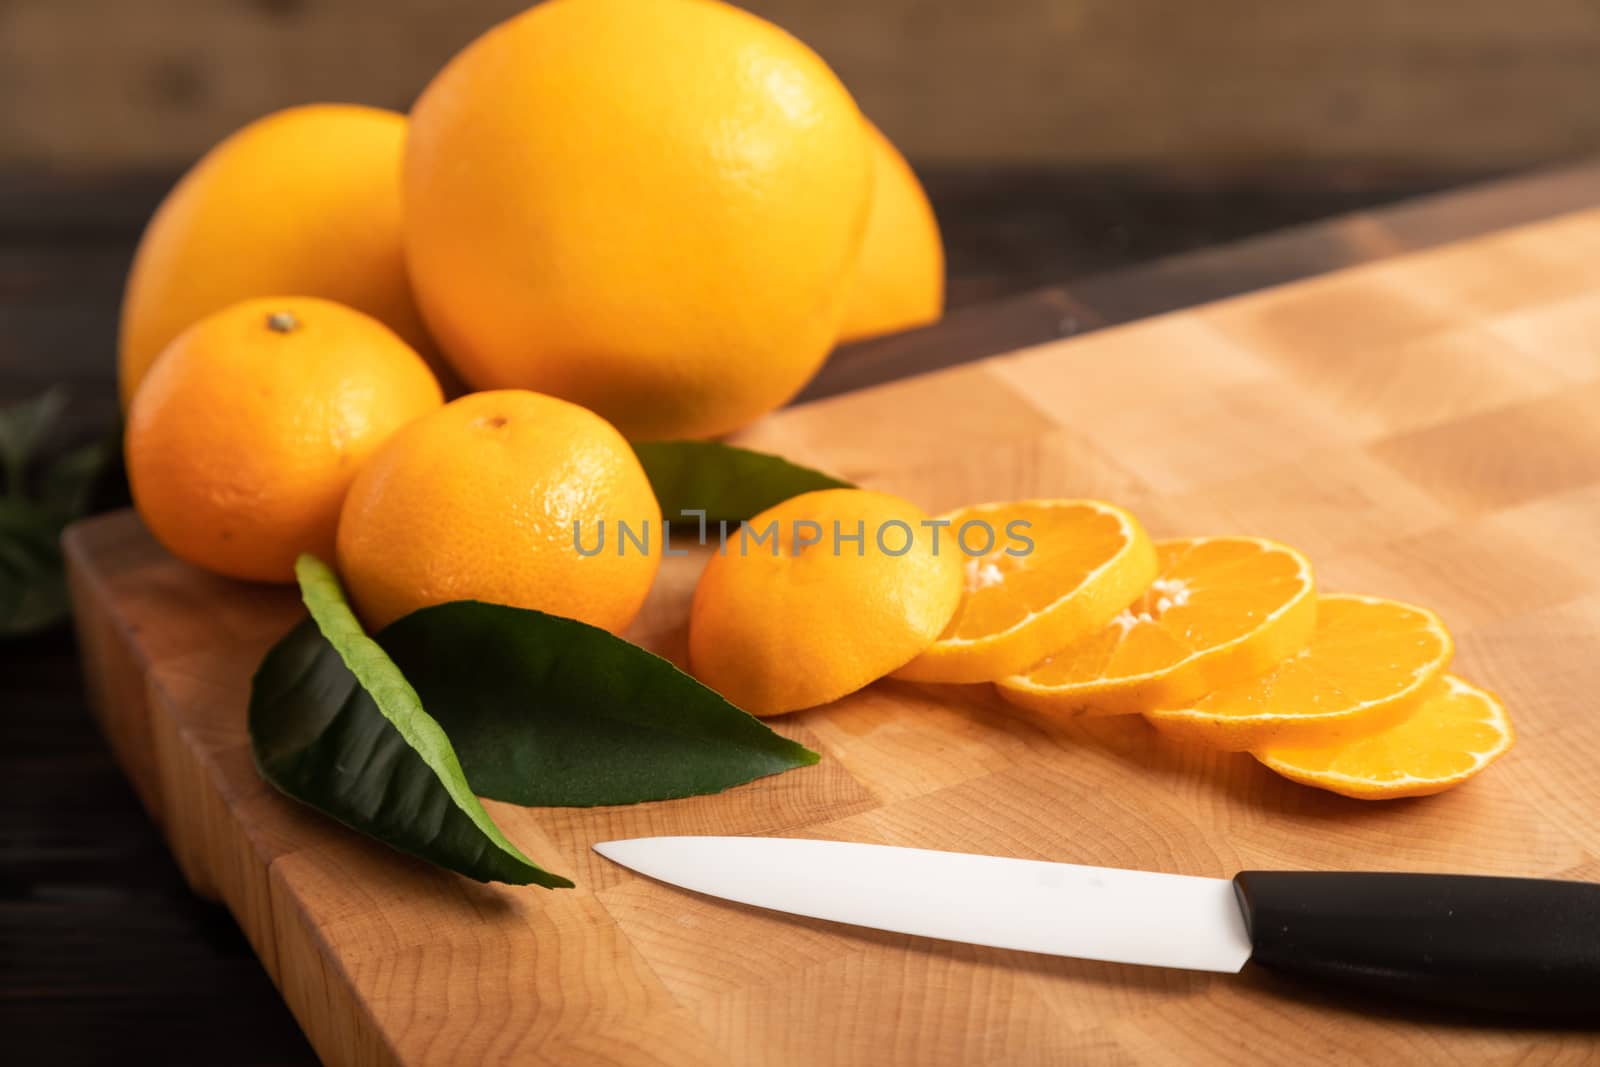 Sliced orange and other fruits on a wooden cutting board by sveter